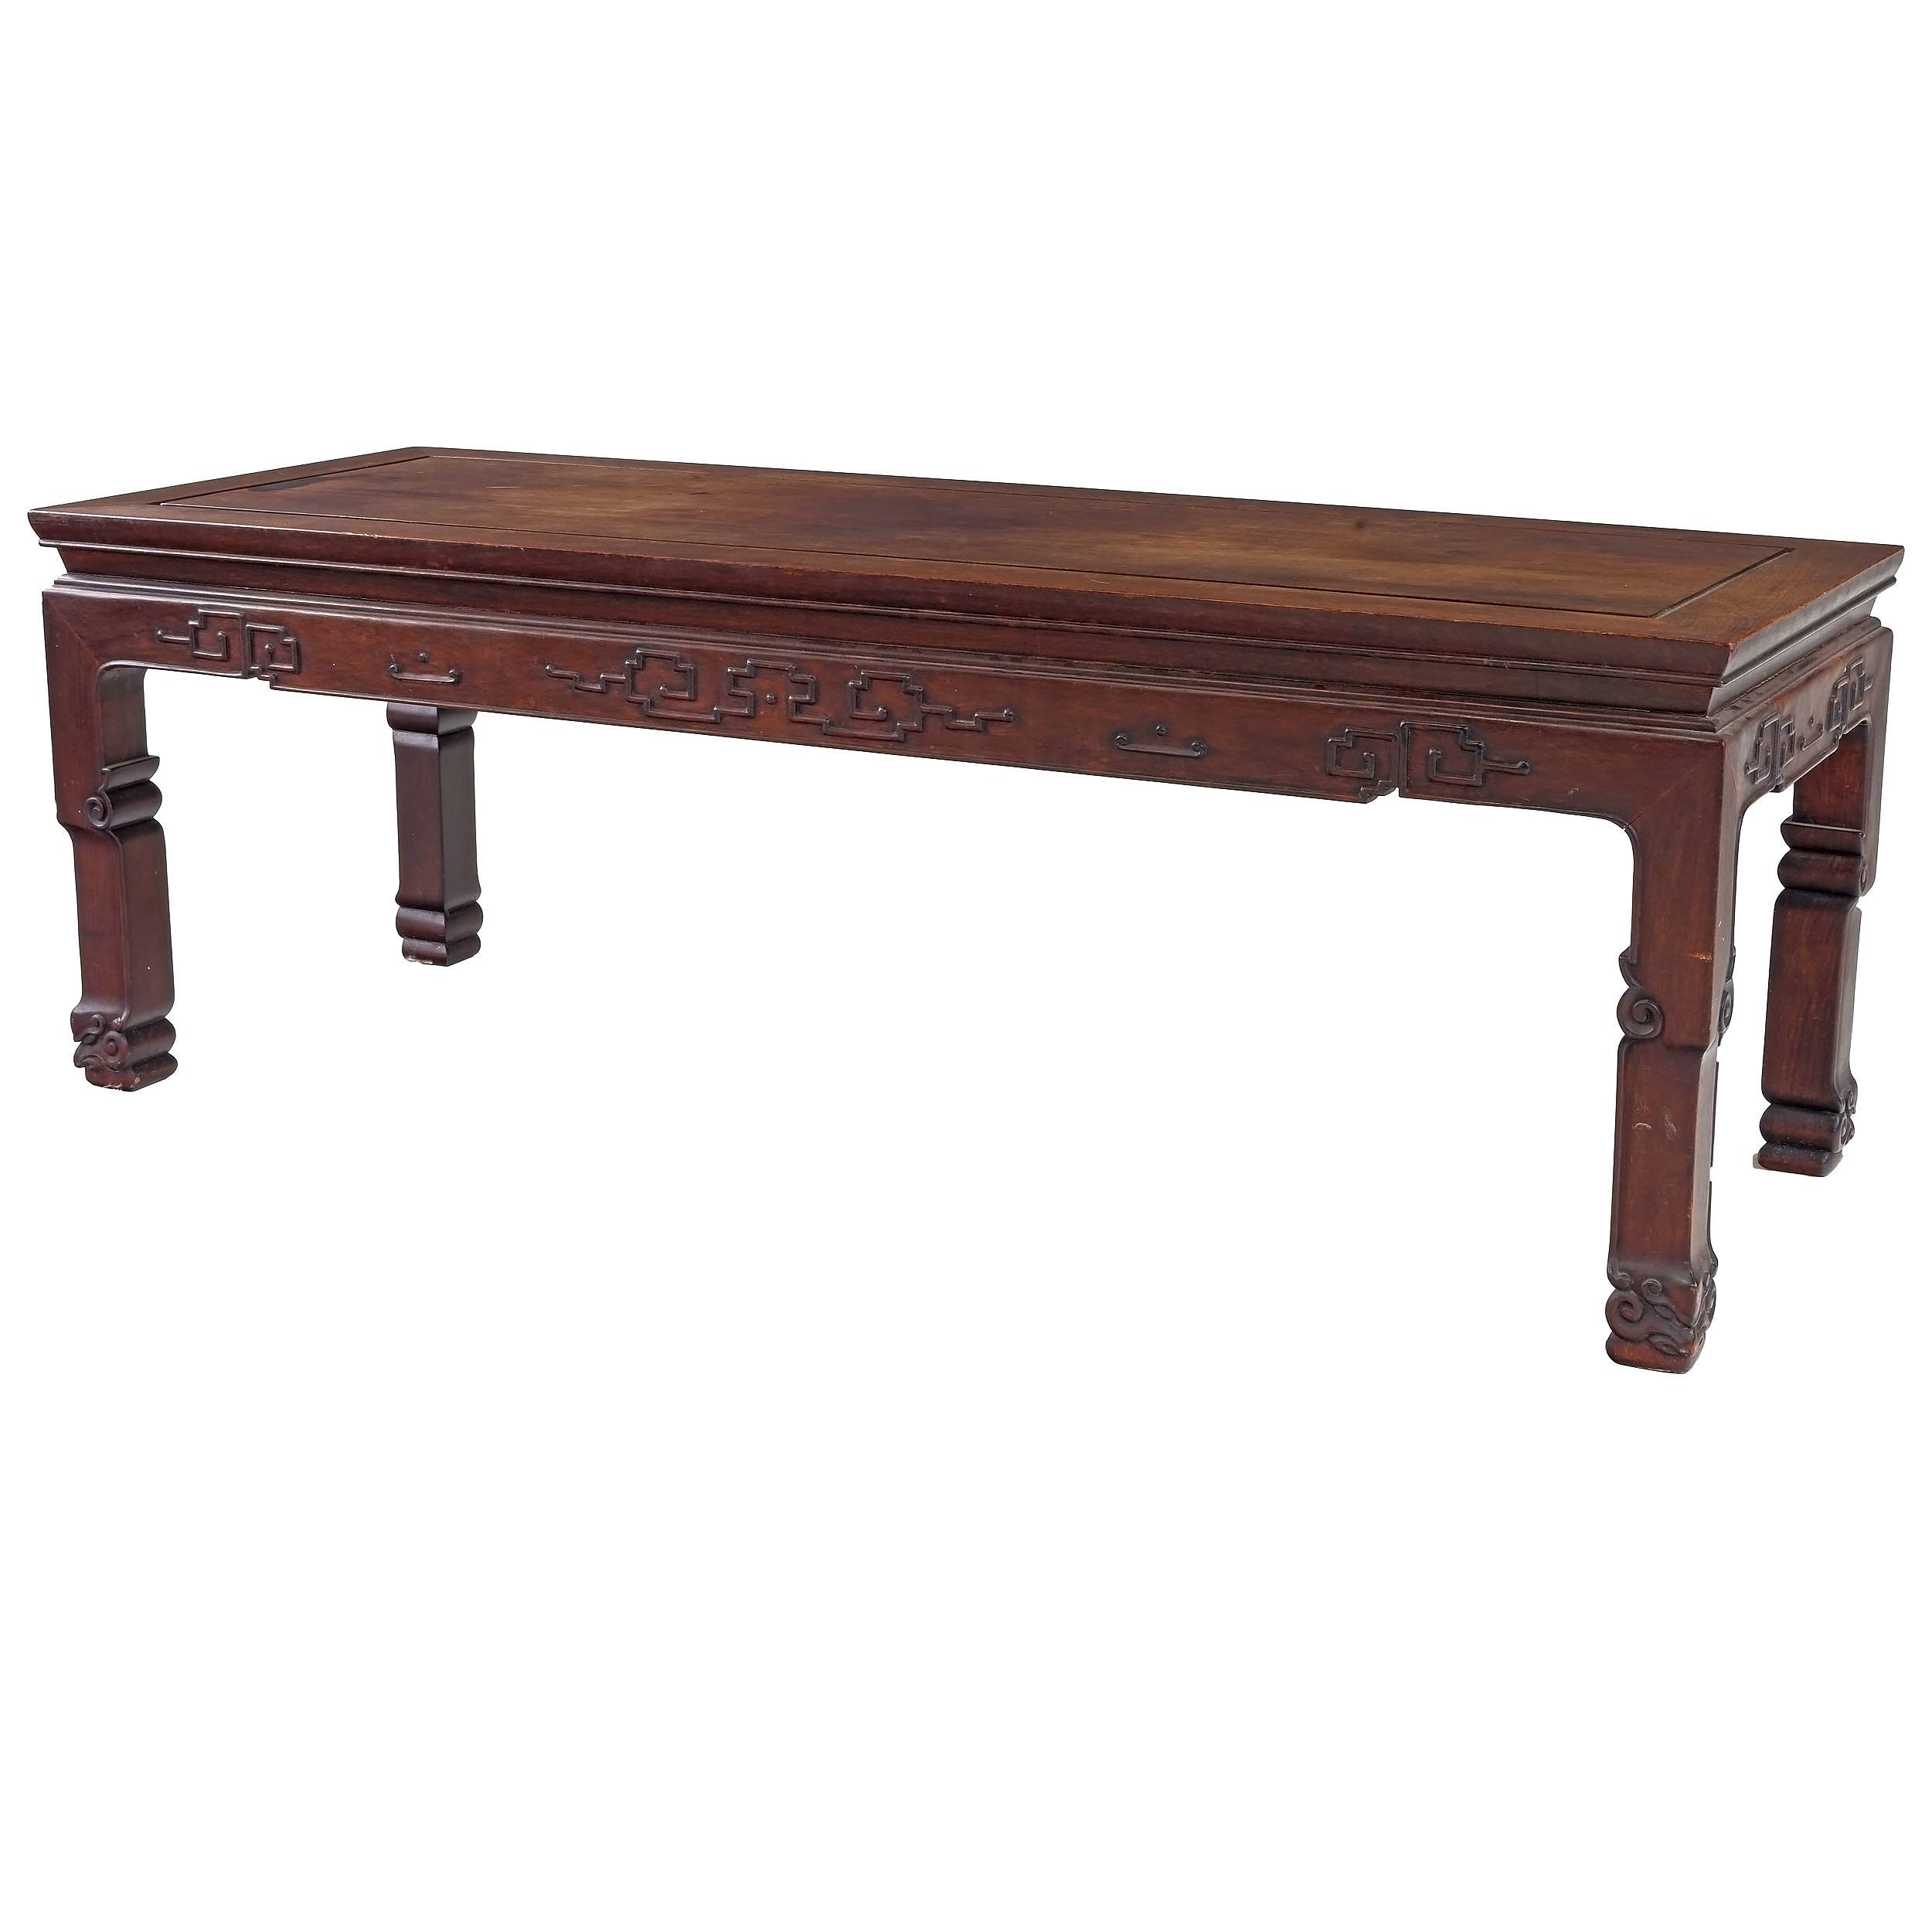 'Chinese Hongmu Rosewood Kang Table, Early to Mid 20th Century'